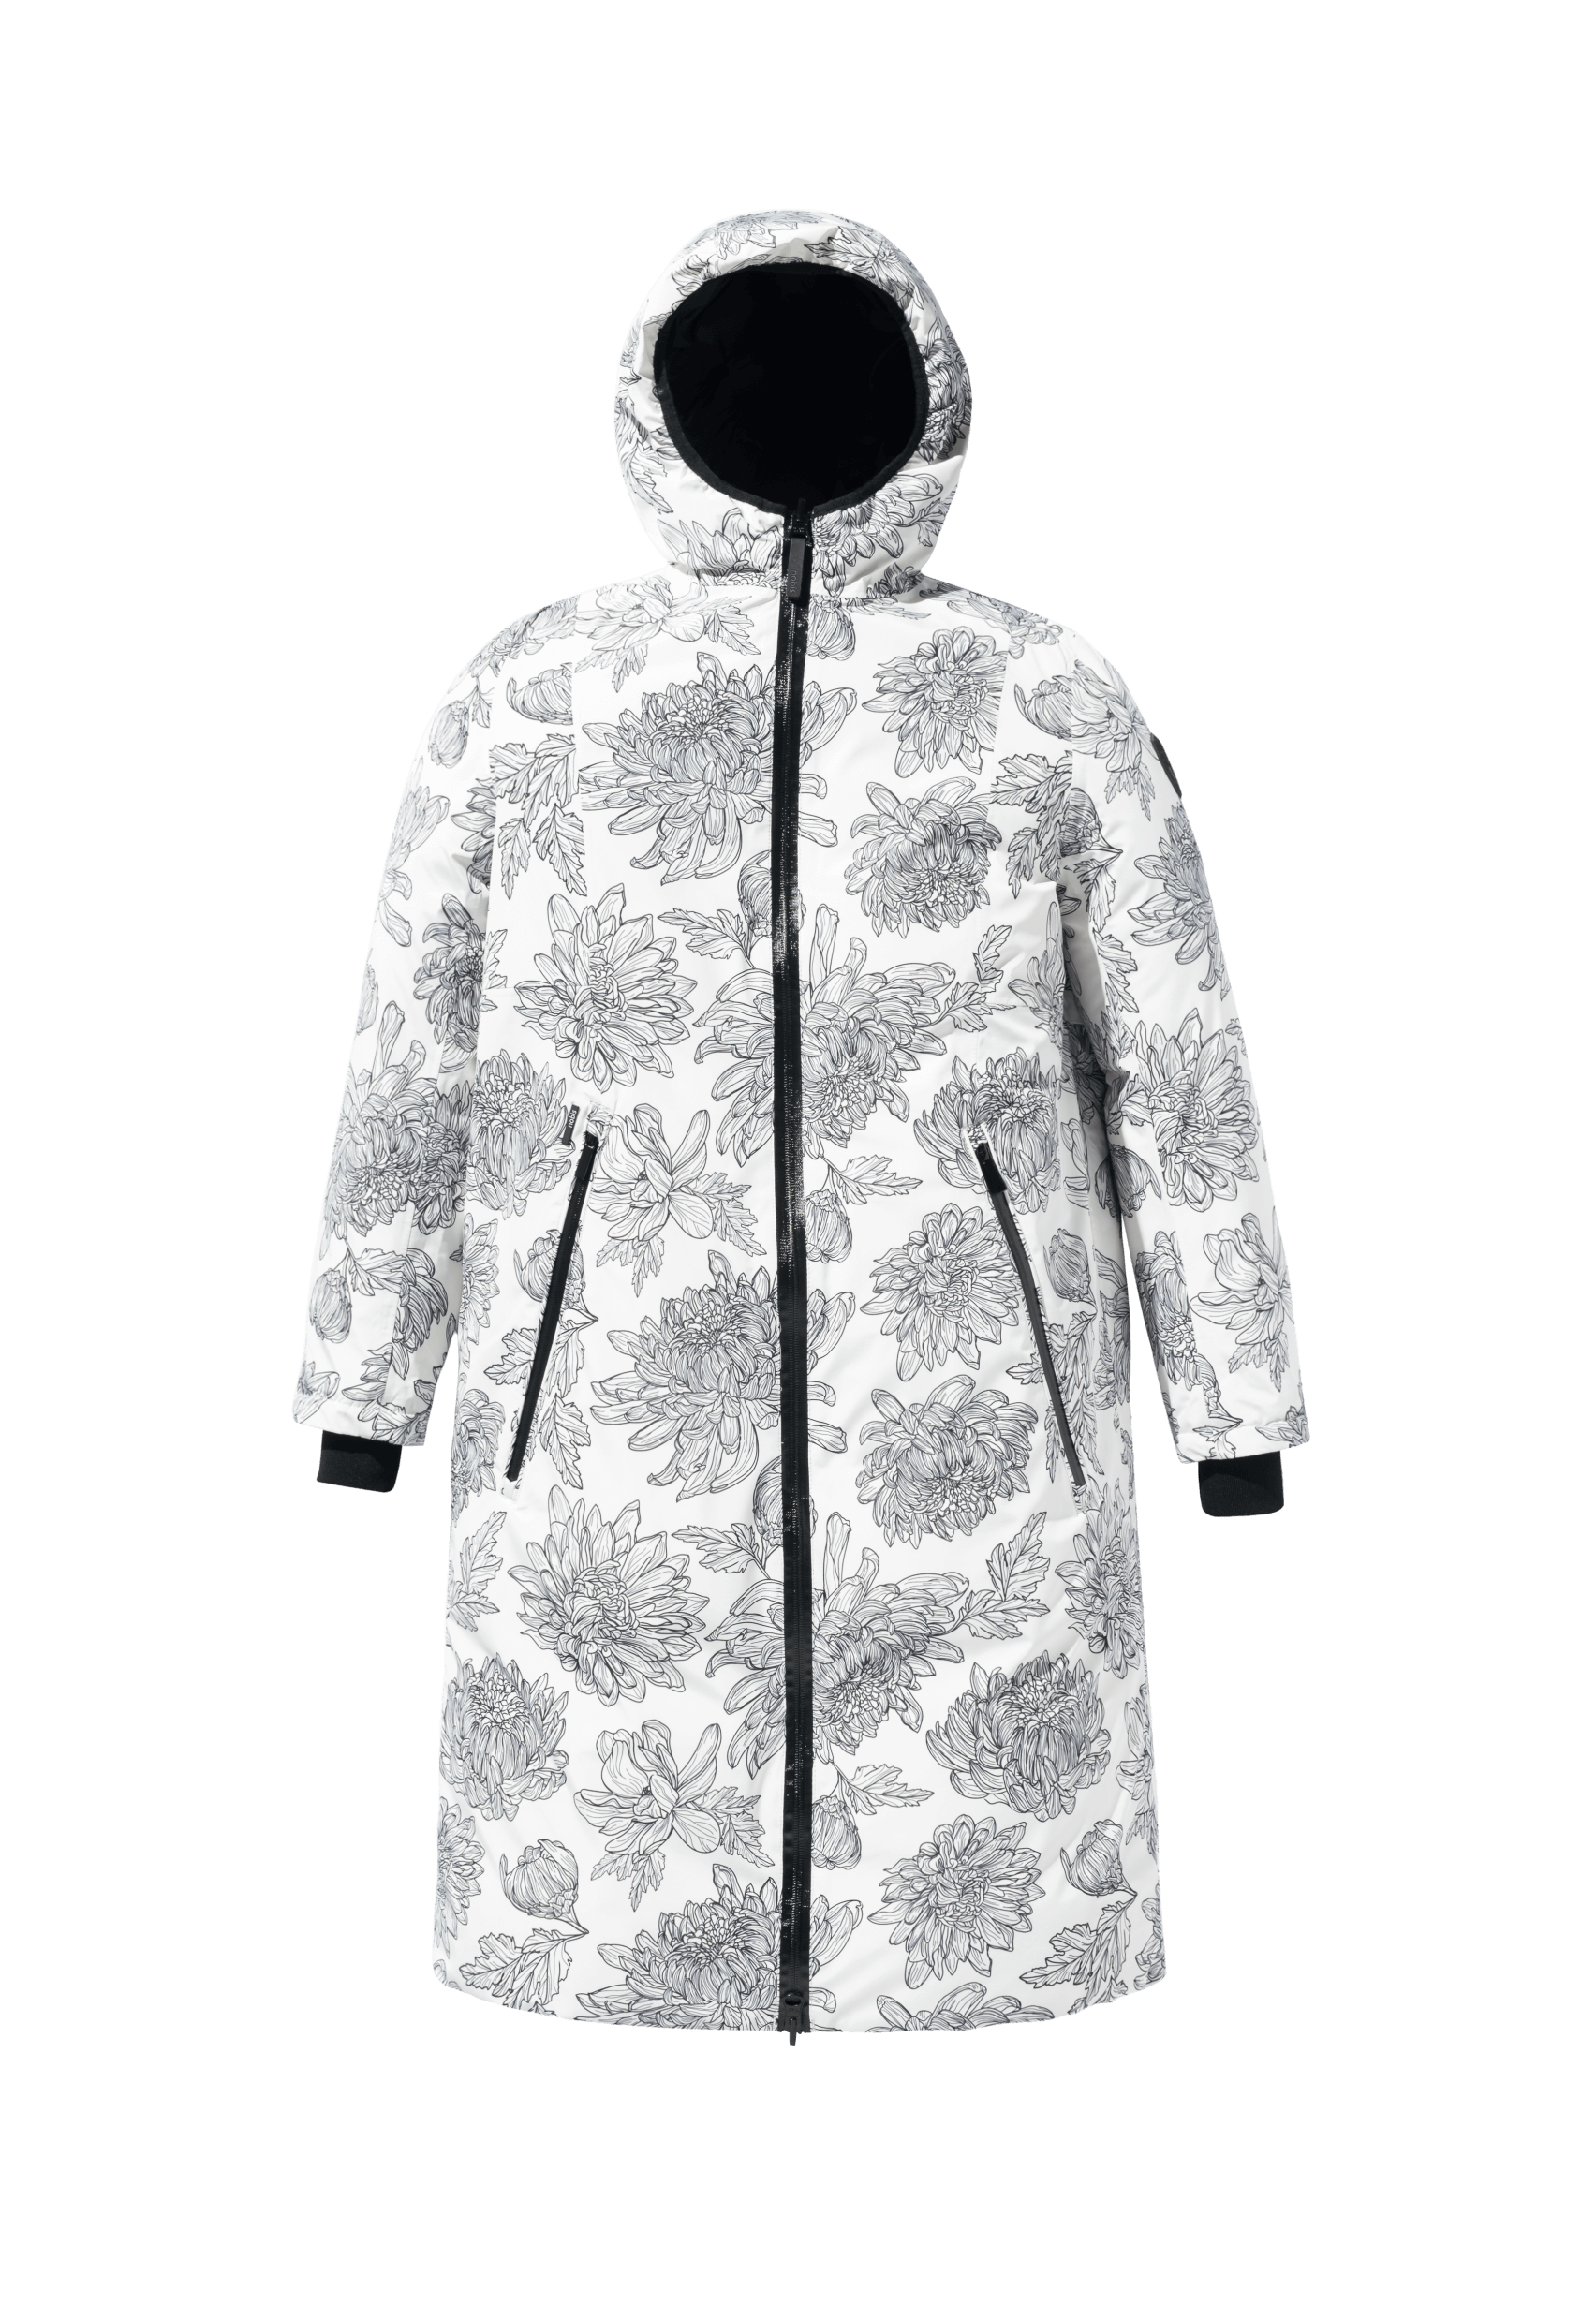 Ladies knee length reversible down-filled parka with non-removable hood in White Floral